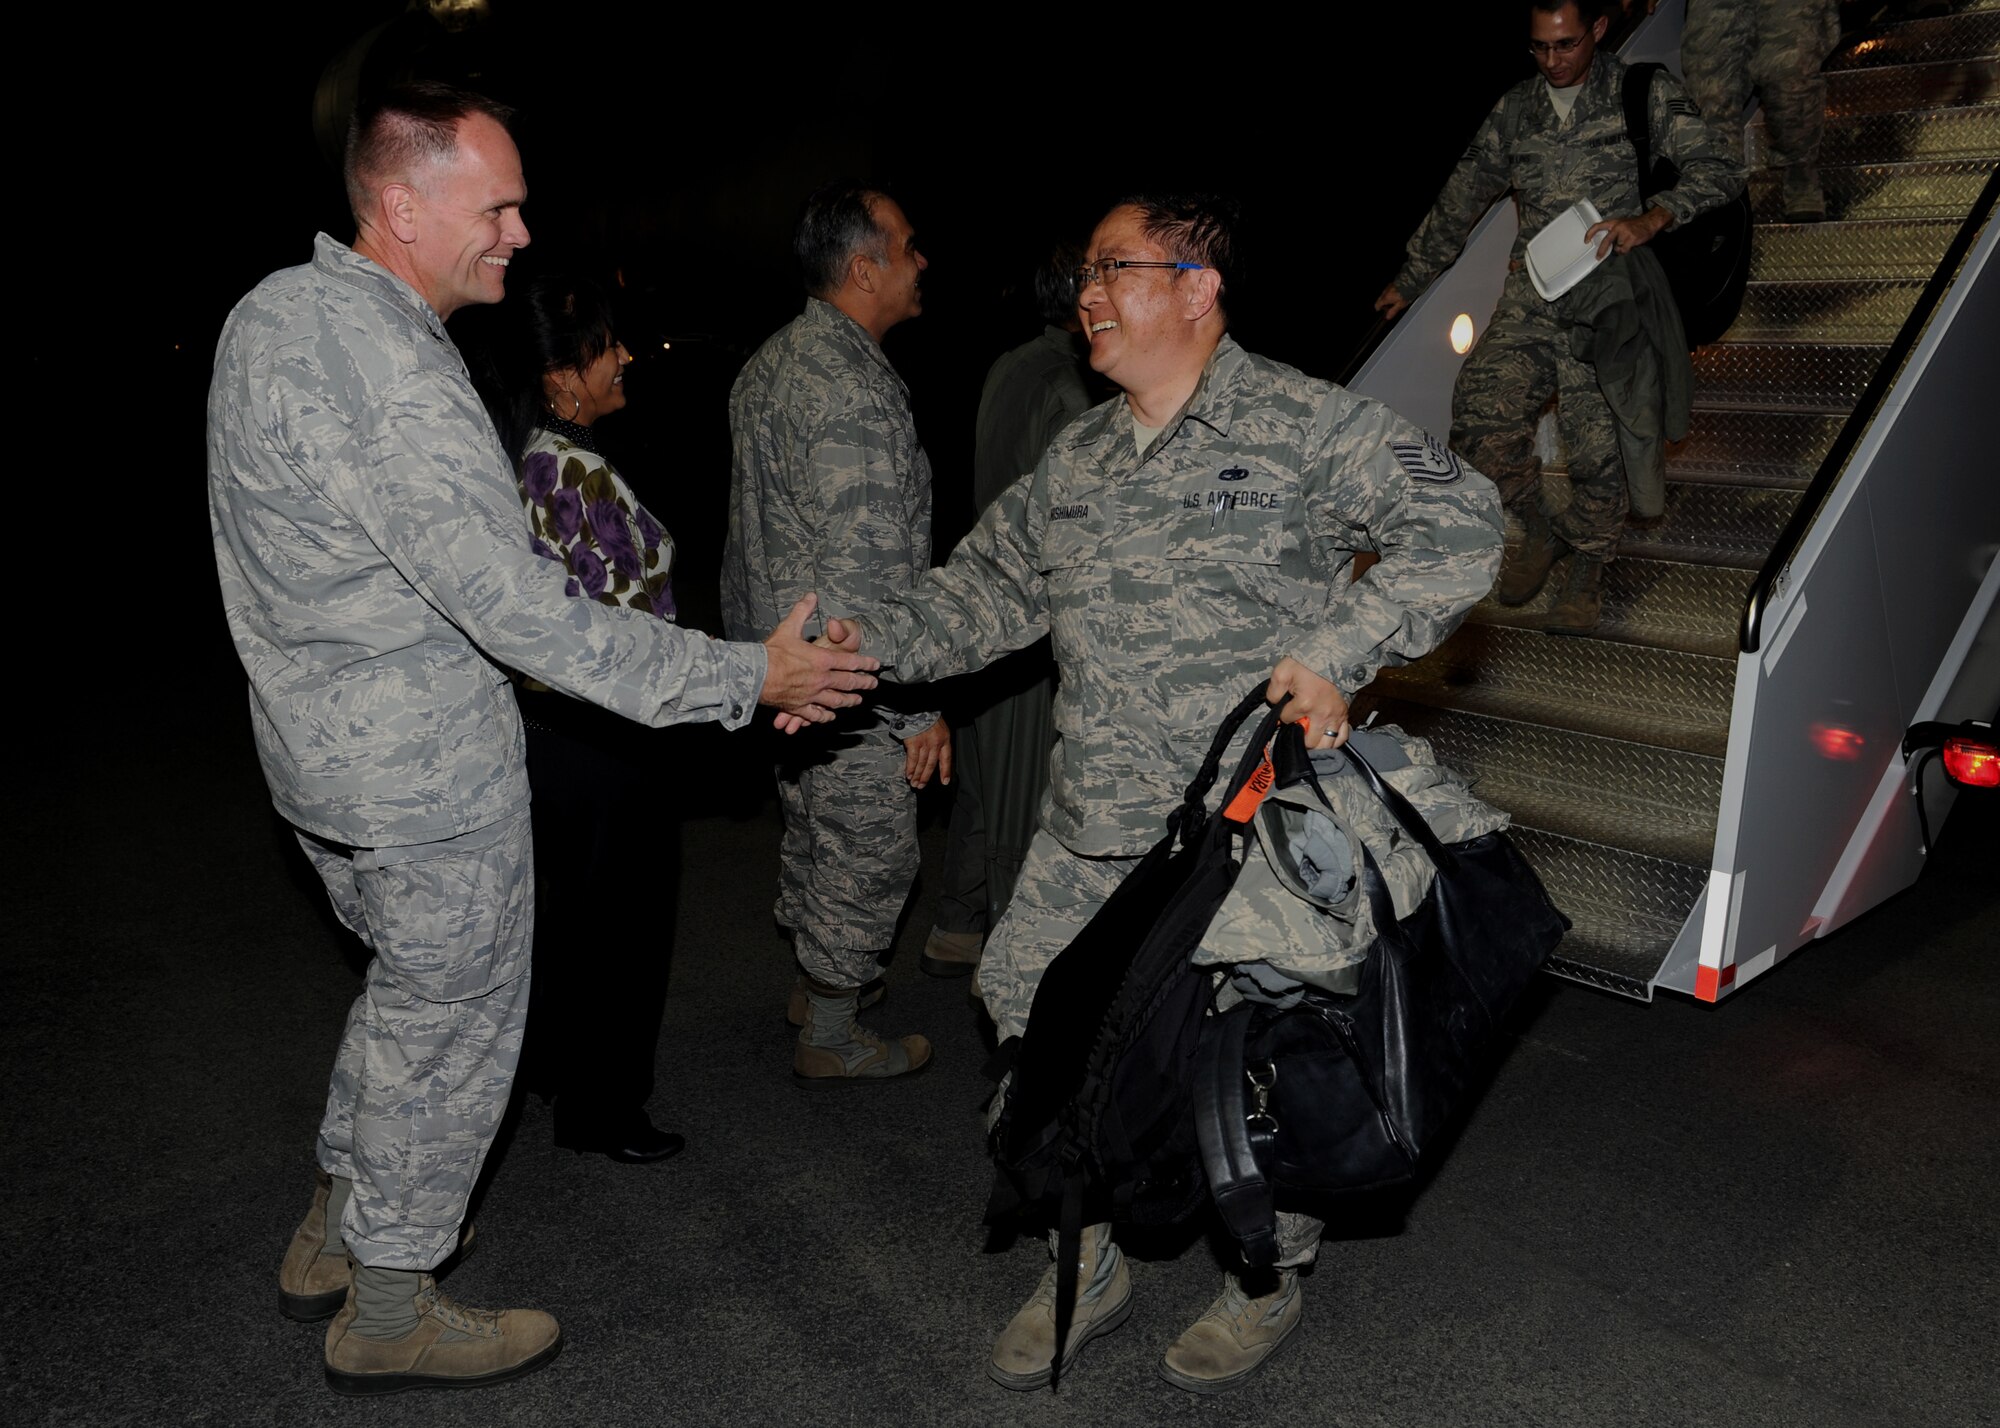 Col. John Roscoe, 15th Wing commander, along with Brig. Gen. Braden Sakai, 154th Wing, Hawaii Air National Guard, commander and his wife, welcome Tech. Sgt. Jay Nishimura, 154th Aircraft Maintenance Squadron F-22 avionics systems specialist, back from Red Flag 13-2 on Feb. 2, 2013. Nishimura, in addition to 151 other integrated active duty, HIANG and contracted personnel, contributed to the successful completion of the two-week long Red Flag exercise at Nellis Air Force Base, Nevada, as part of the Hawaiian Raptor’s first over-water deployment. (U.S. Air Force photo/Staff Sgt. Terri Barriere)